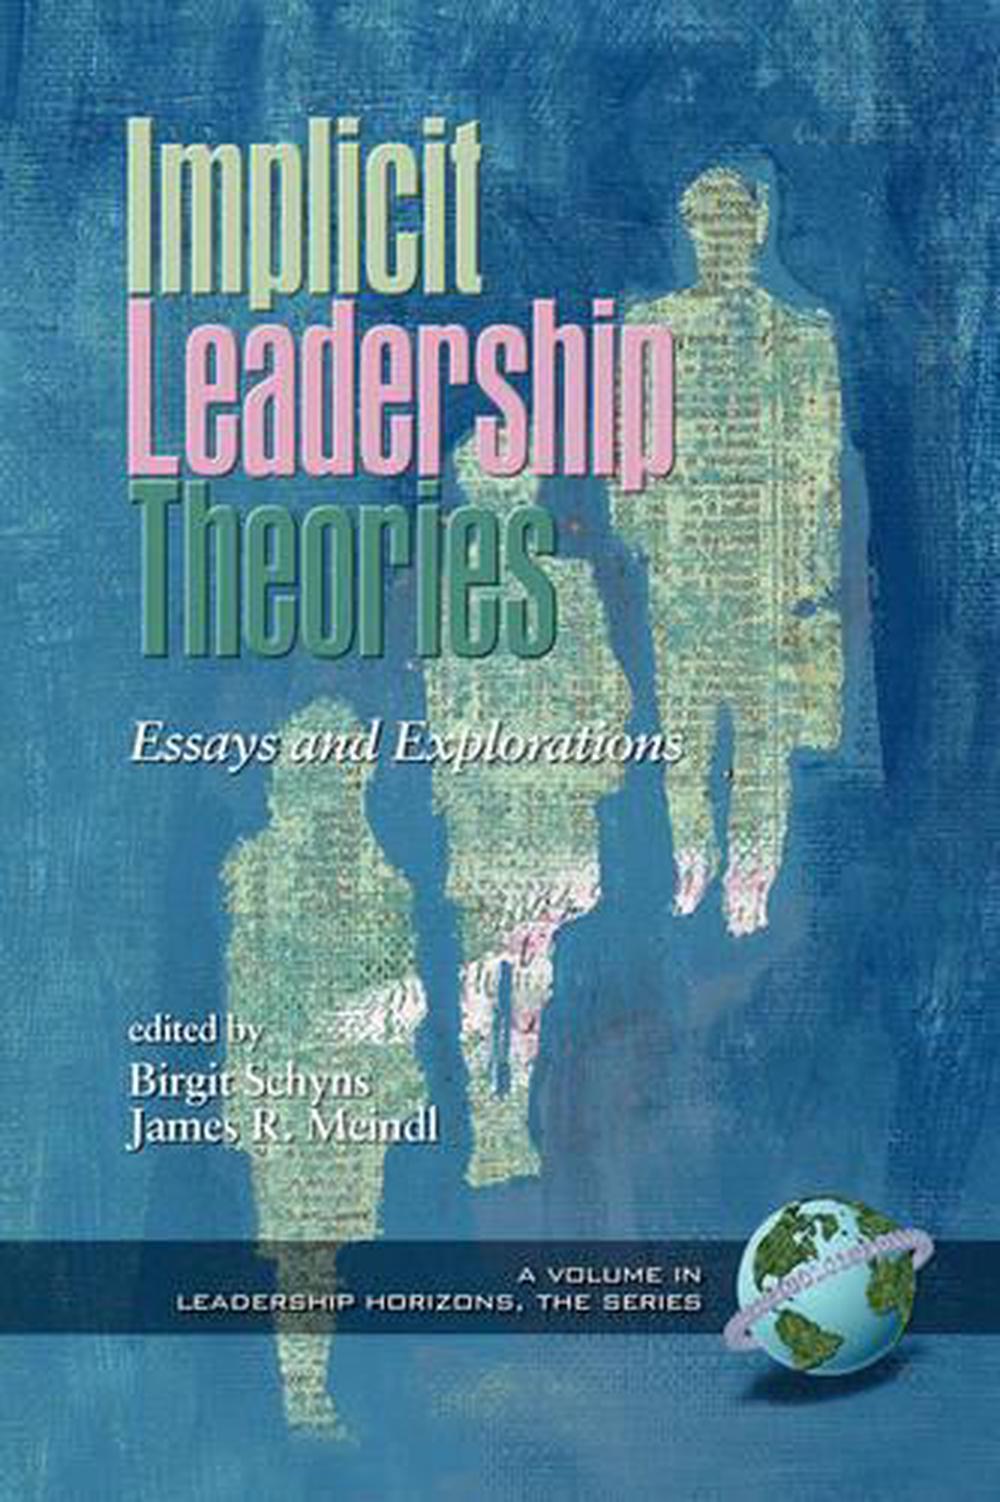 Implicit Leadership Theories: Essays and Explorations (PB) by Birgit ...